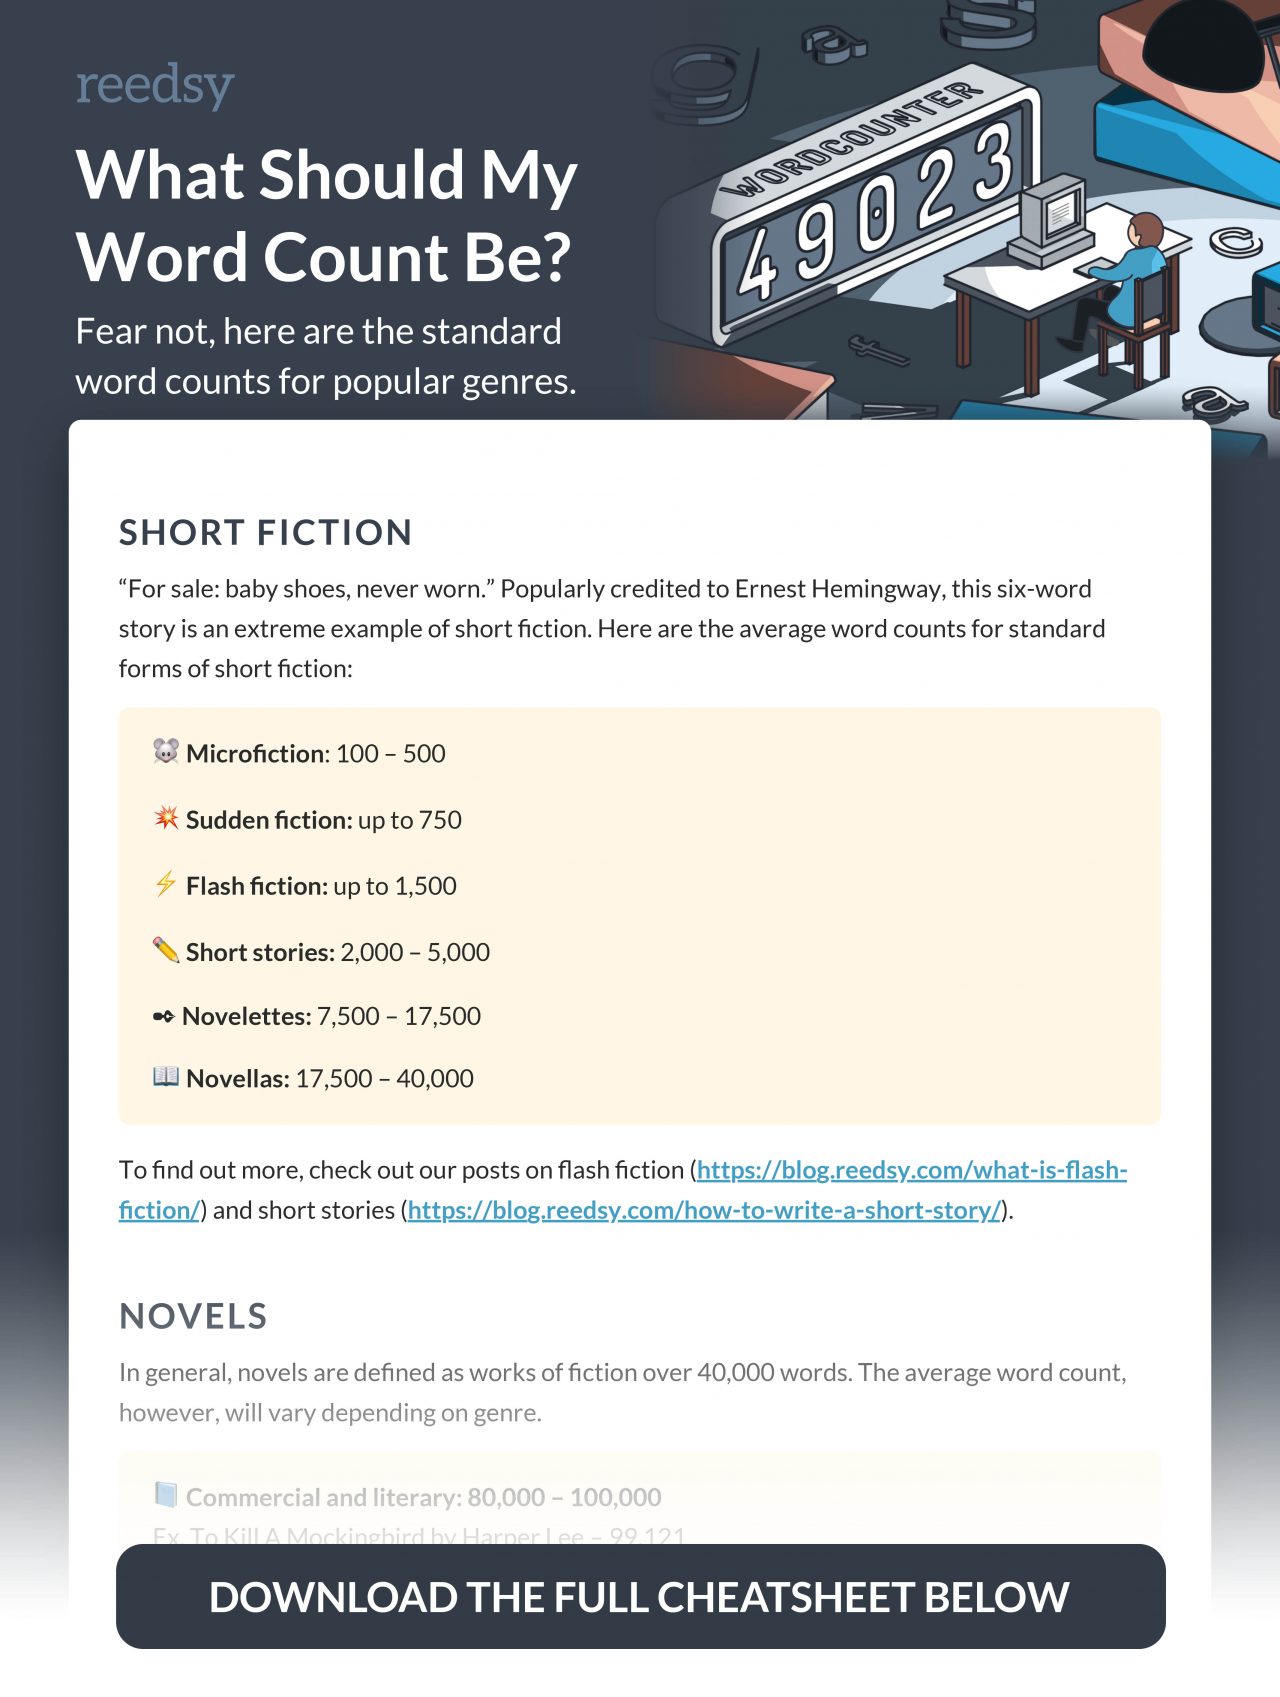 word count for harlequin romance novels